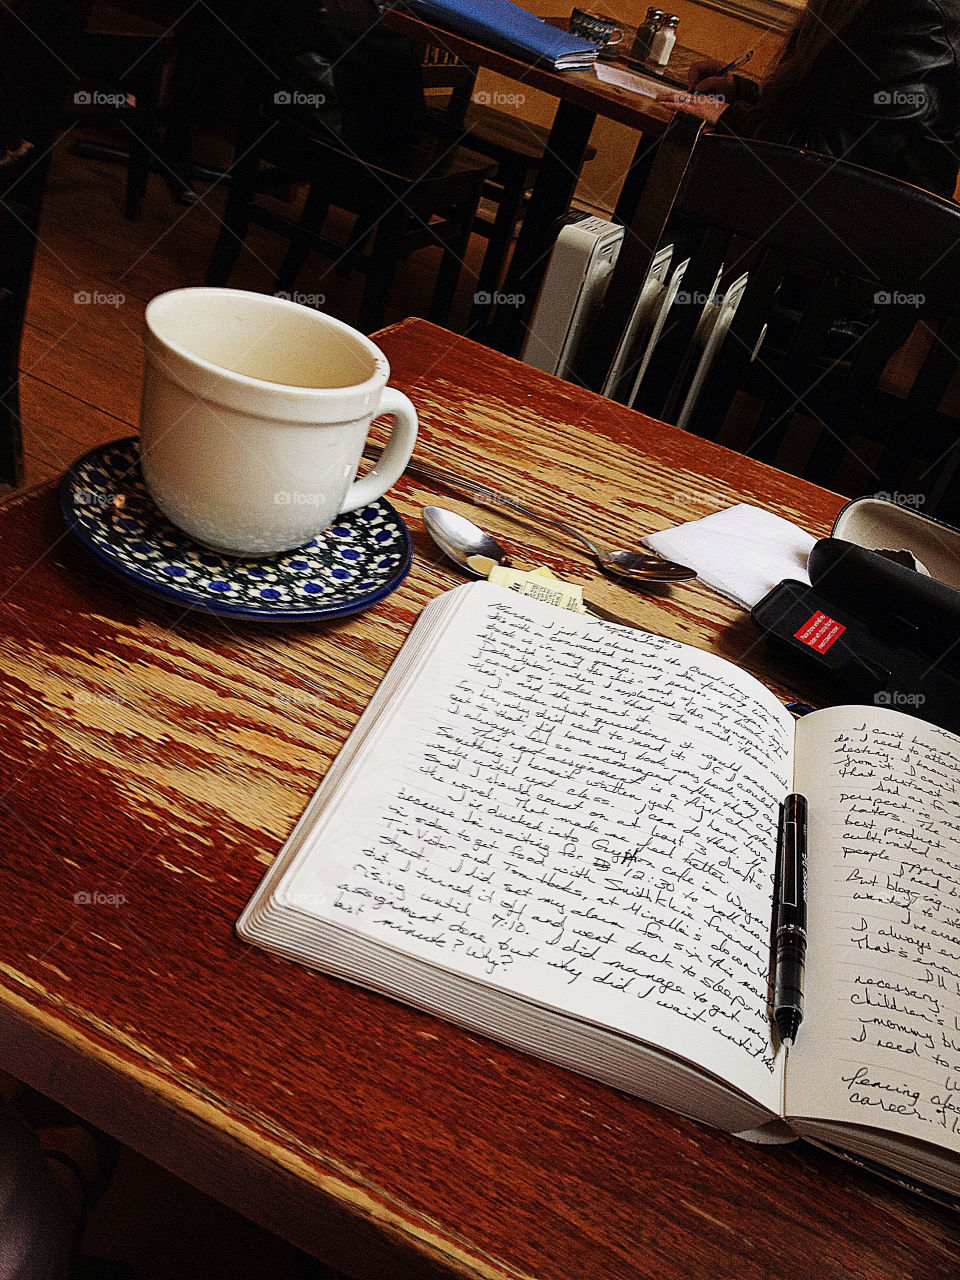 Journaling in a cafe